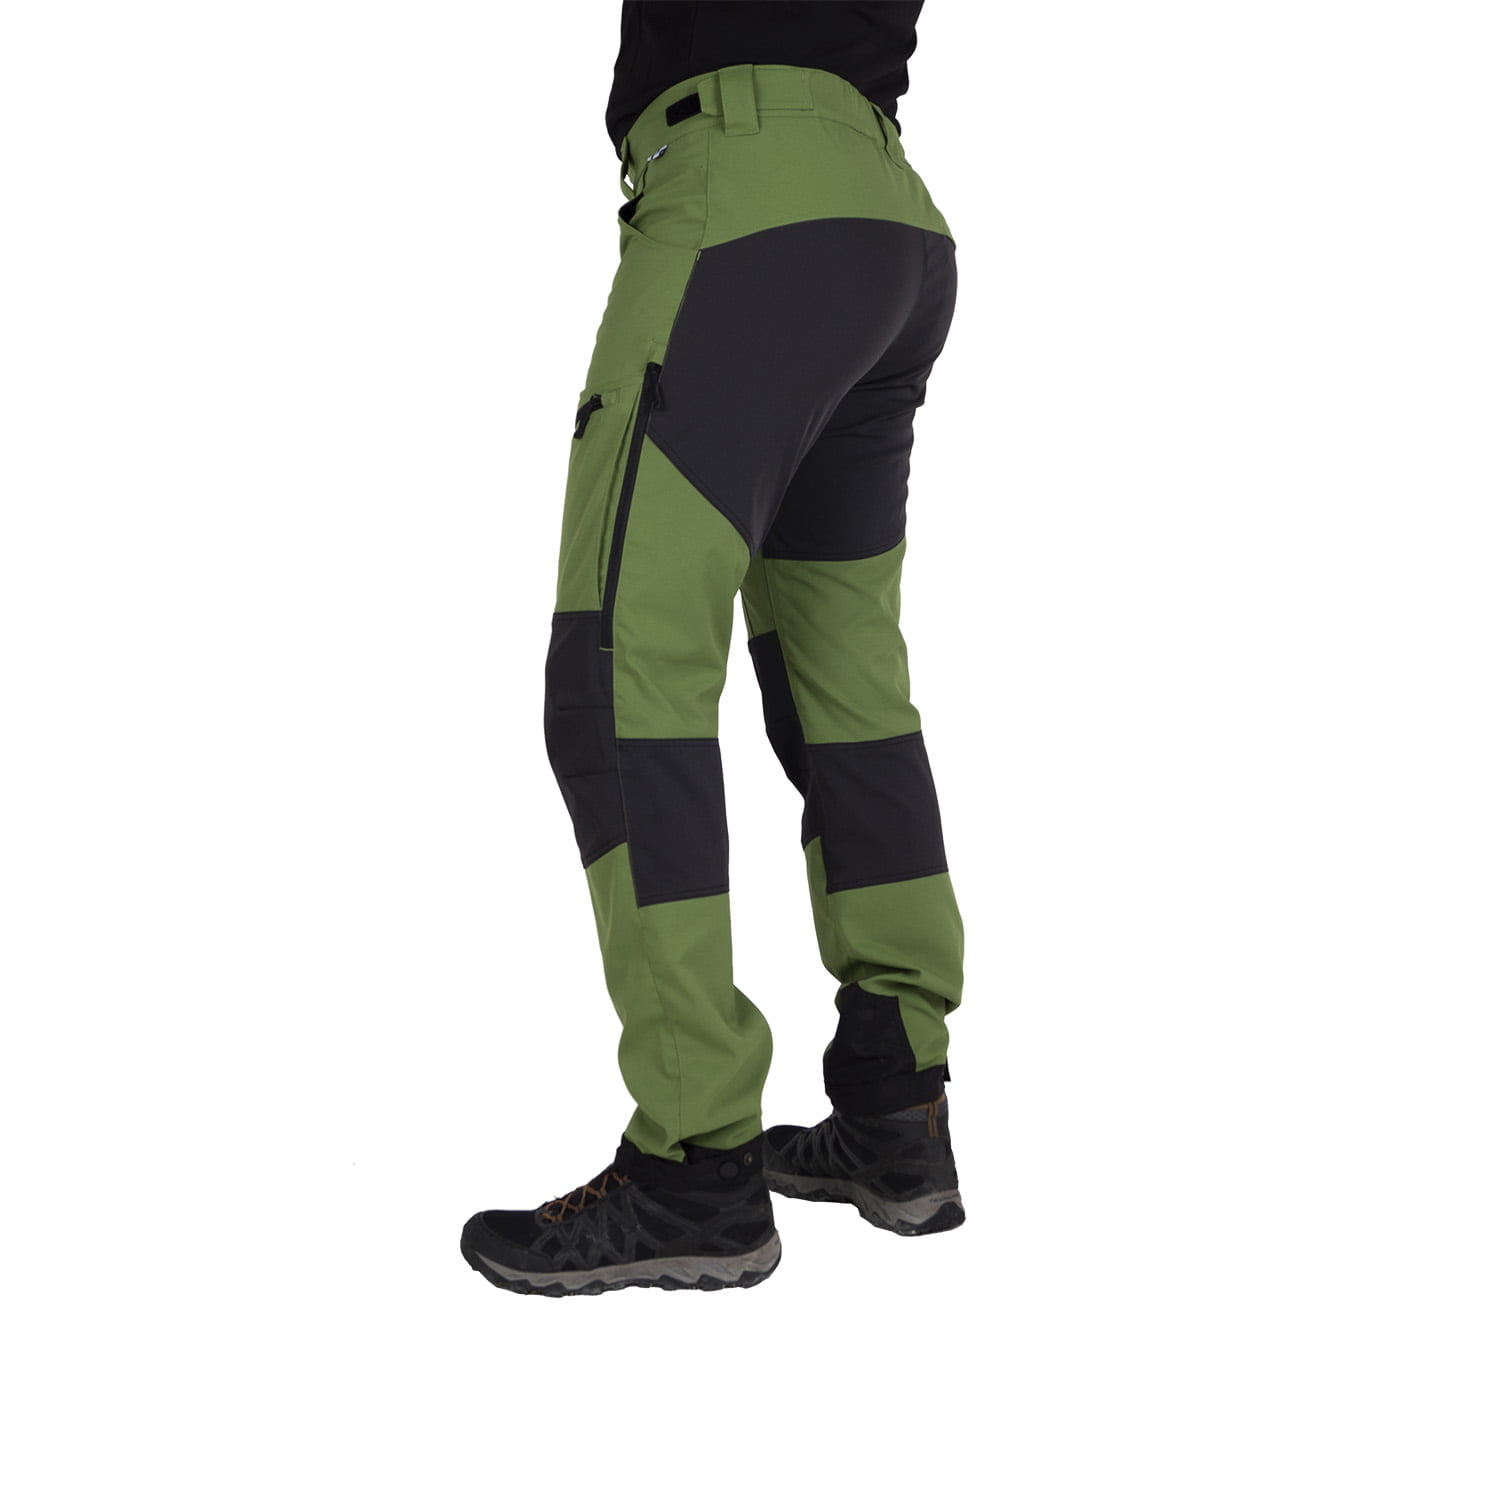 Nokko Green outdoor trousers for men shown from the back on the model